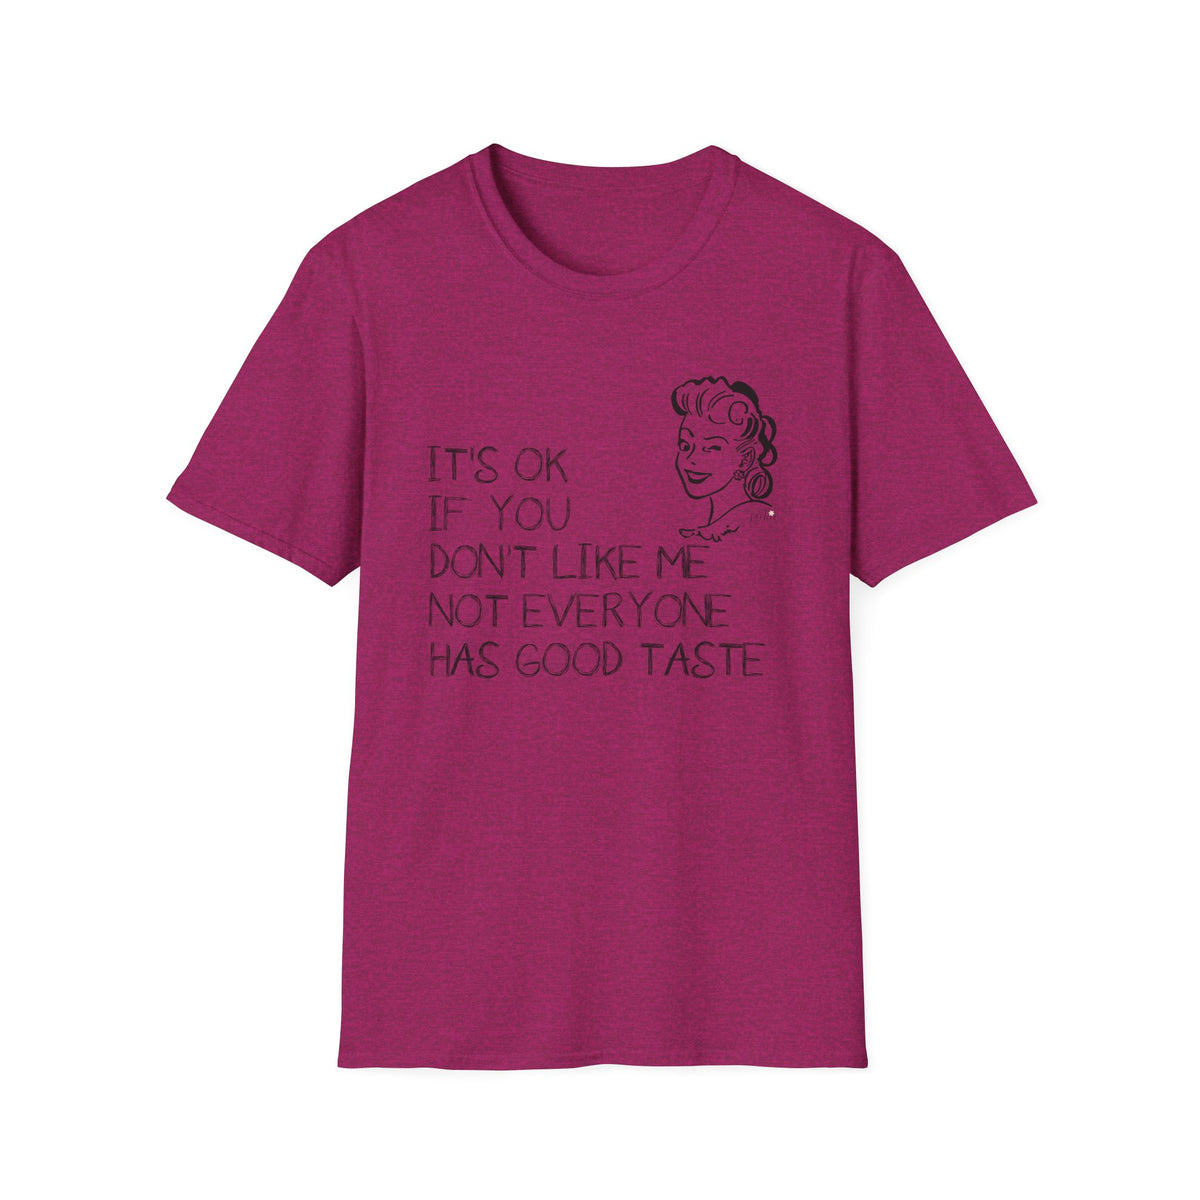 It's OK if you don't like me - Softstyle T-Shirt